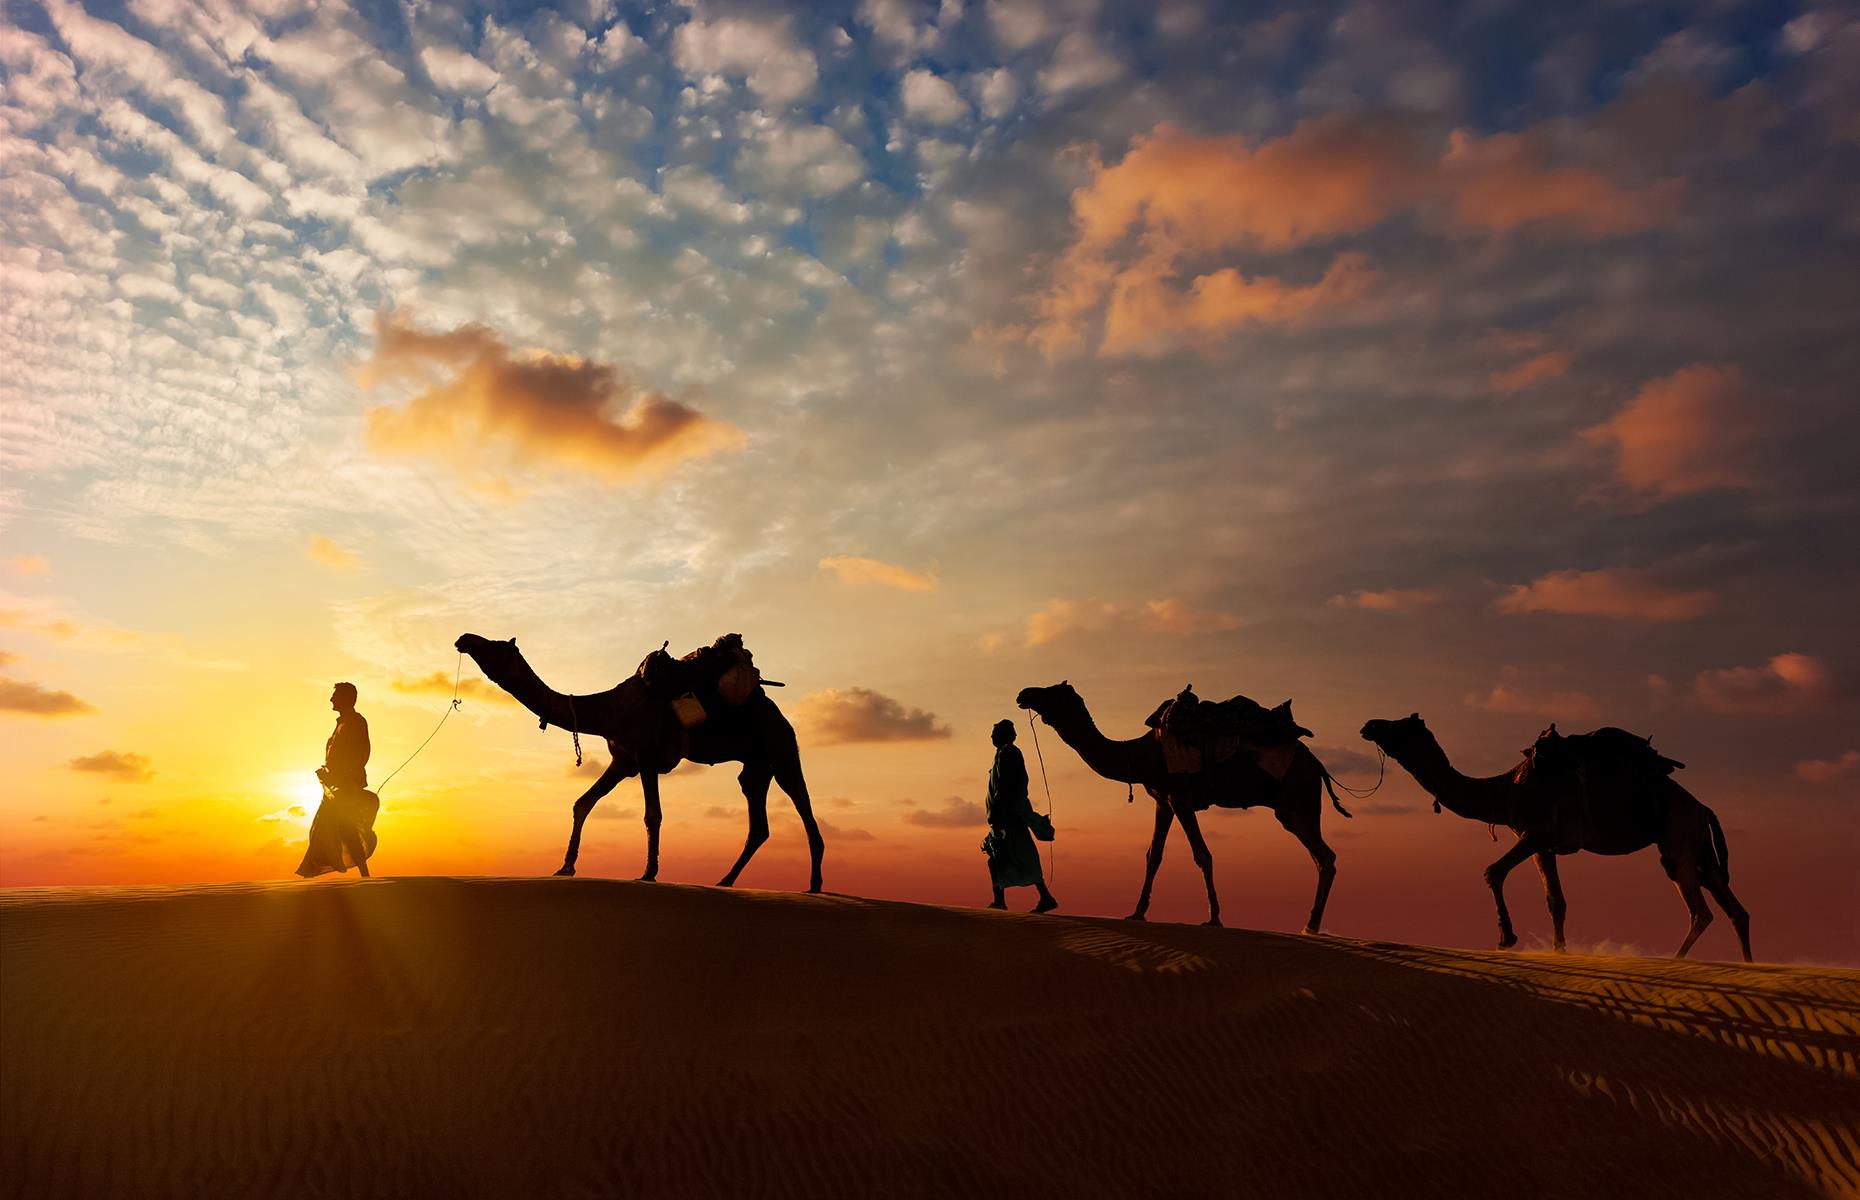 <p>This arid region covers 77,000 square miles of sand dunes and open skies and is fringed by gorgeous Rajasthani cities like Jaisalmer and Jaipur. The best way to see the Thar Desert is on an overnight camel trek with a local tour operator.</p>  <p>You'll trek for a couple of hours before stopping at an open-air camp, where you'll enjoy traditional entertainment, a serious Rajasthani feast, and then overnight under the millions of stars.</p>